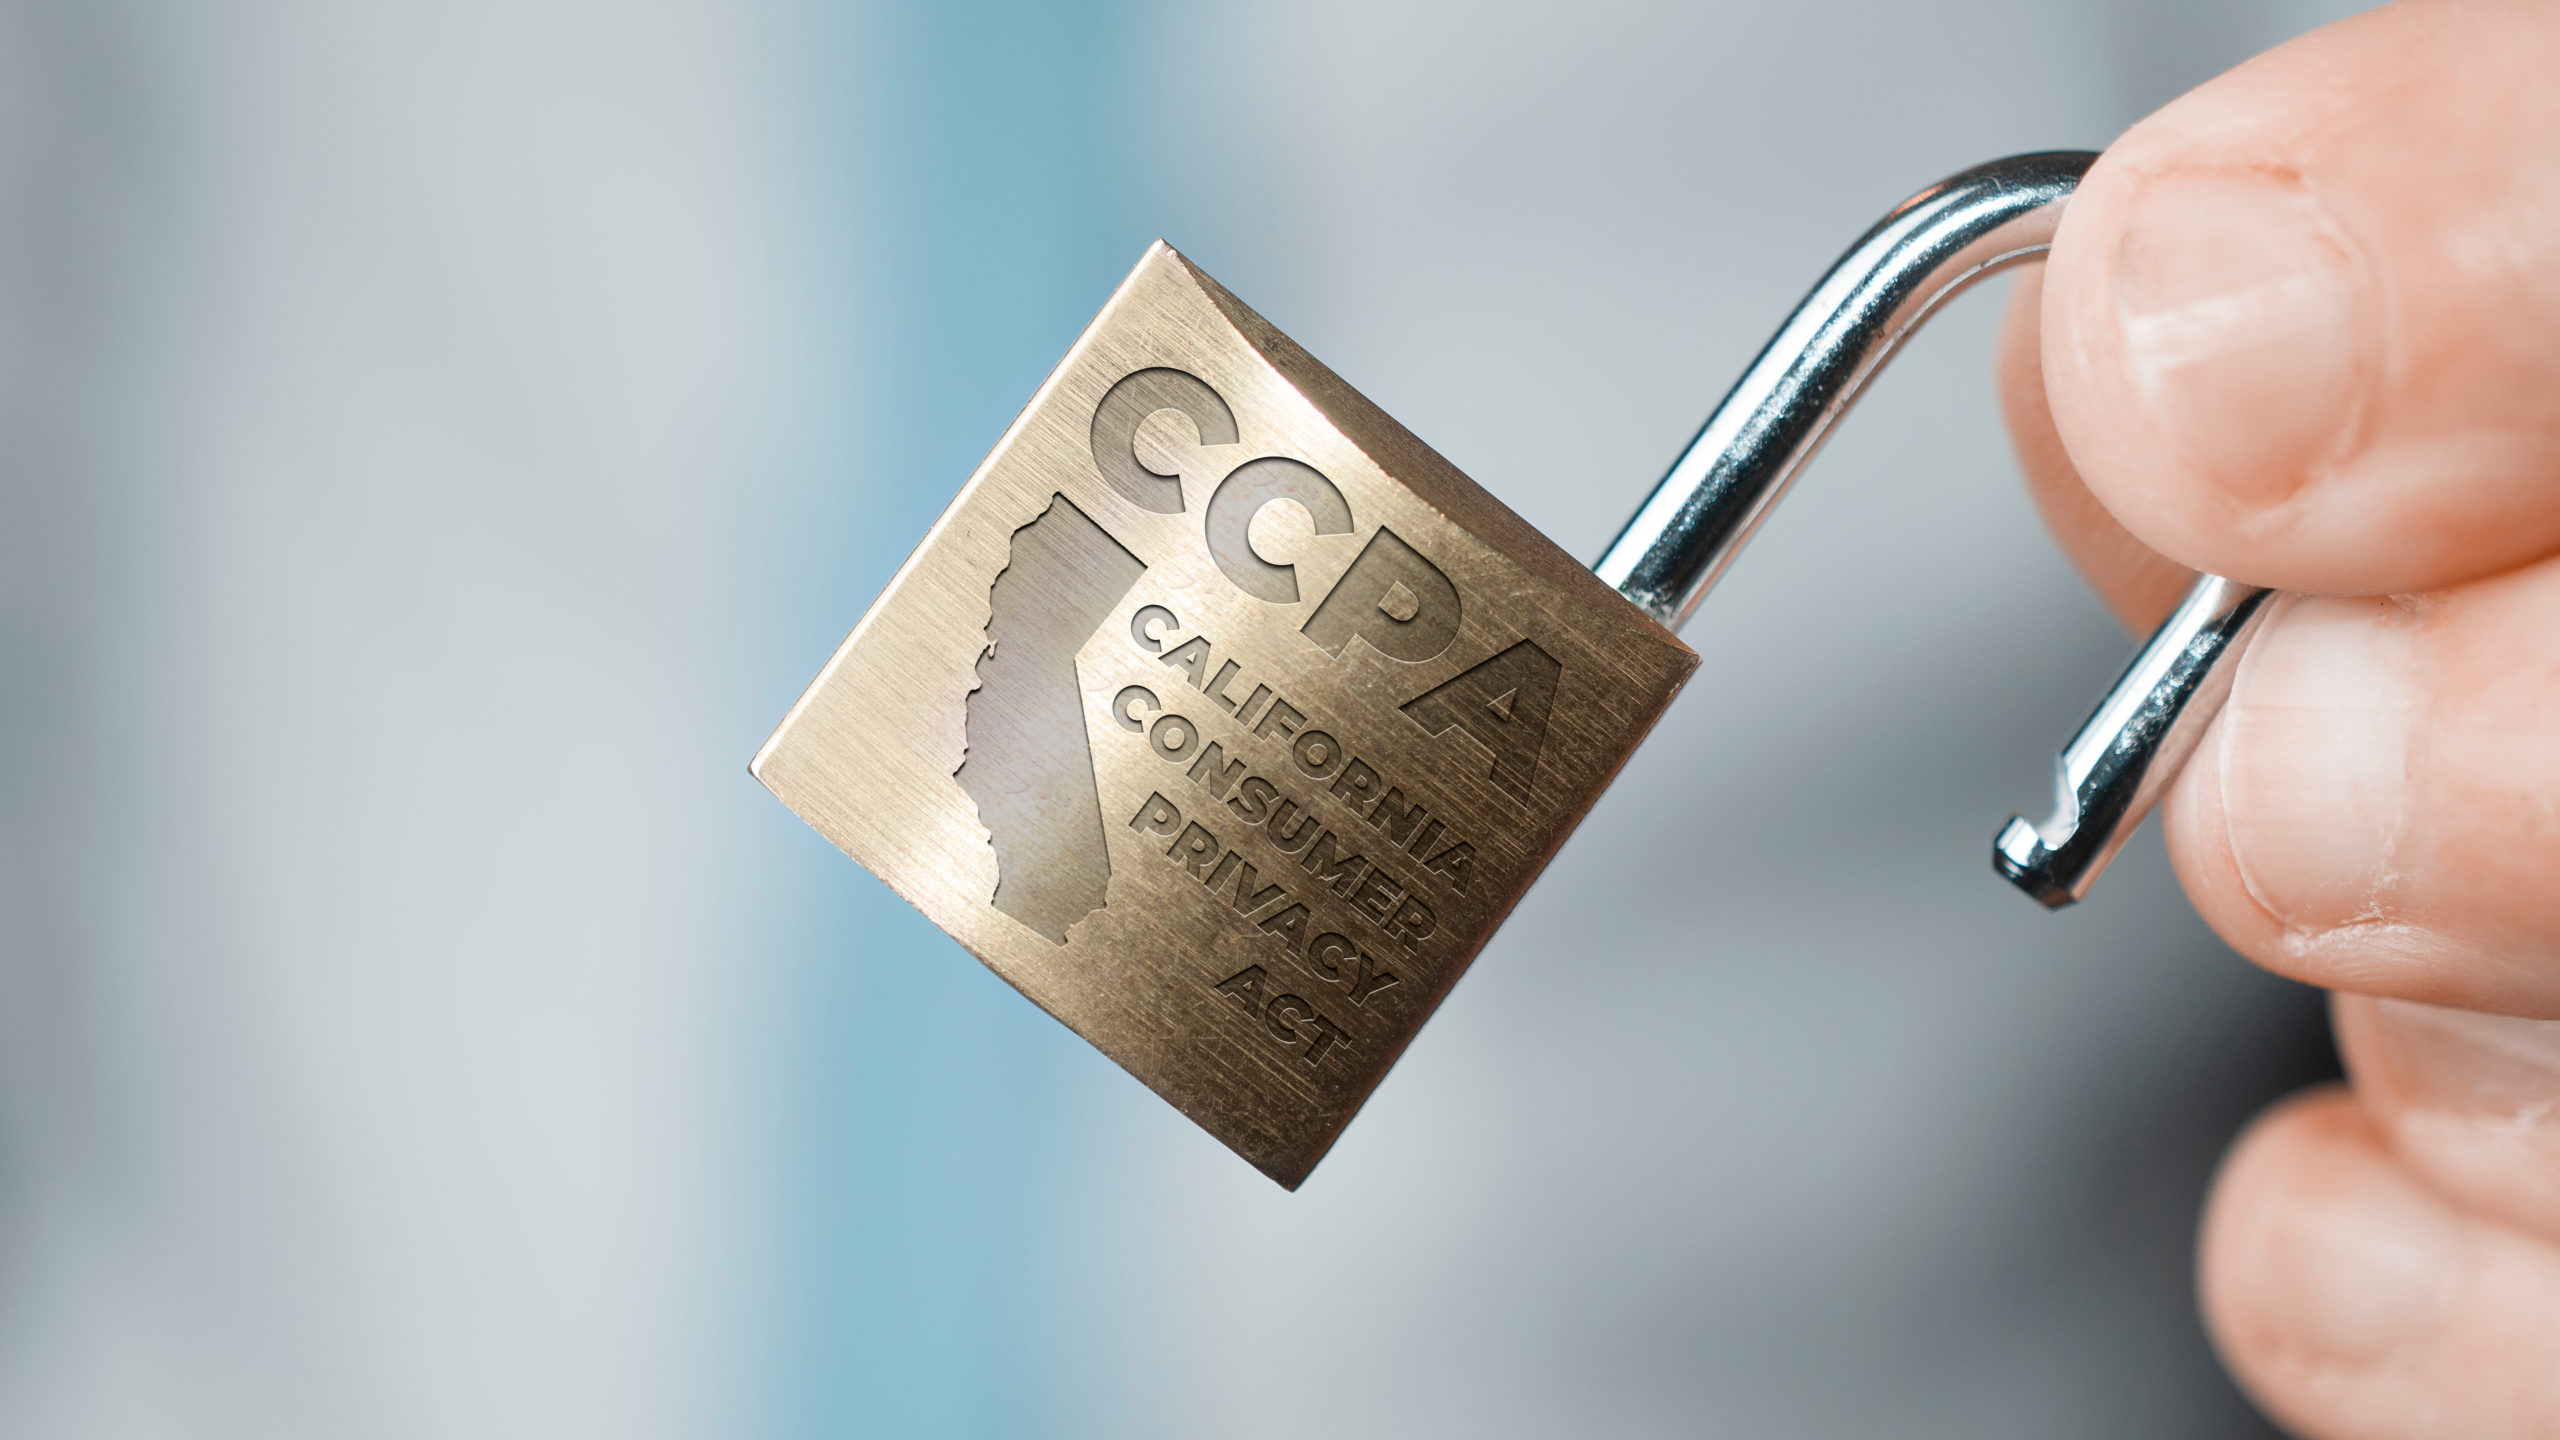 Close up of hand holding open brass padlock engraved with shape of California and text “CCPA California Consumer Privacy Act.”